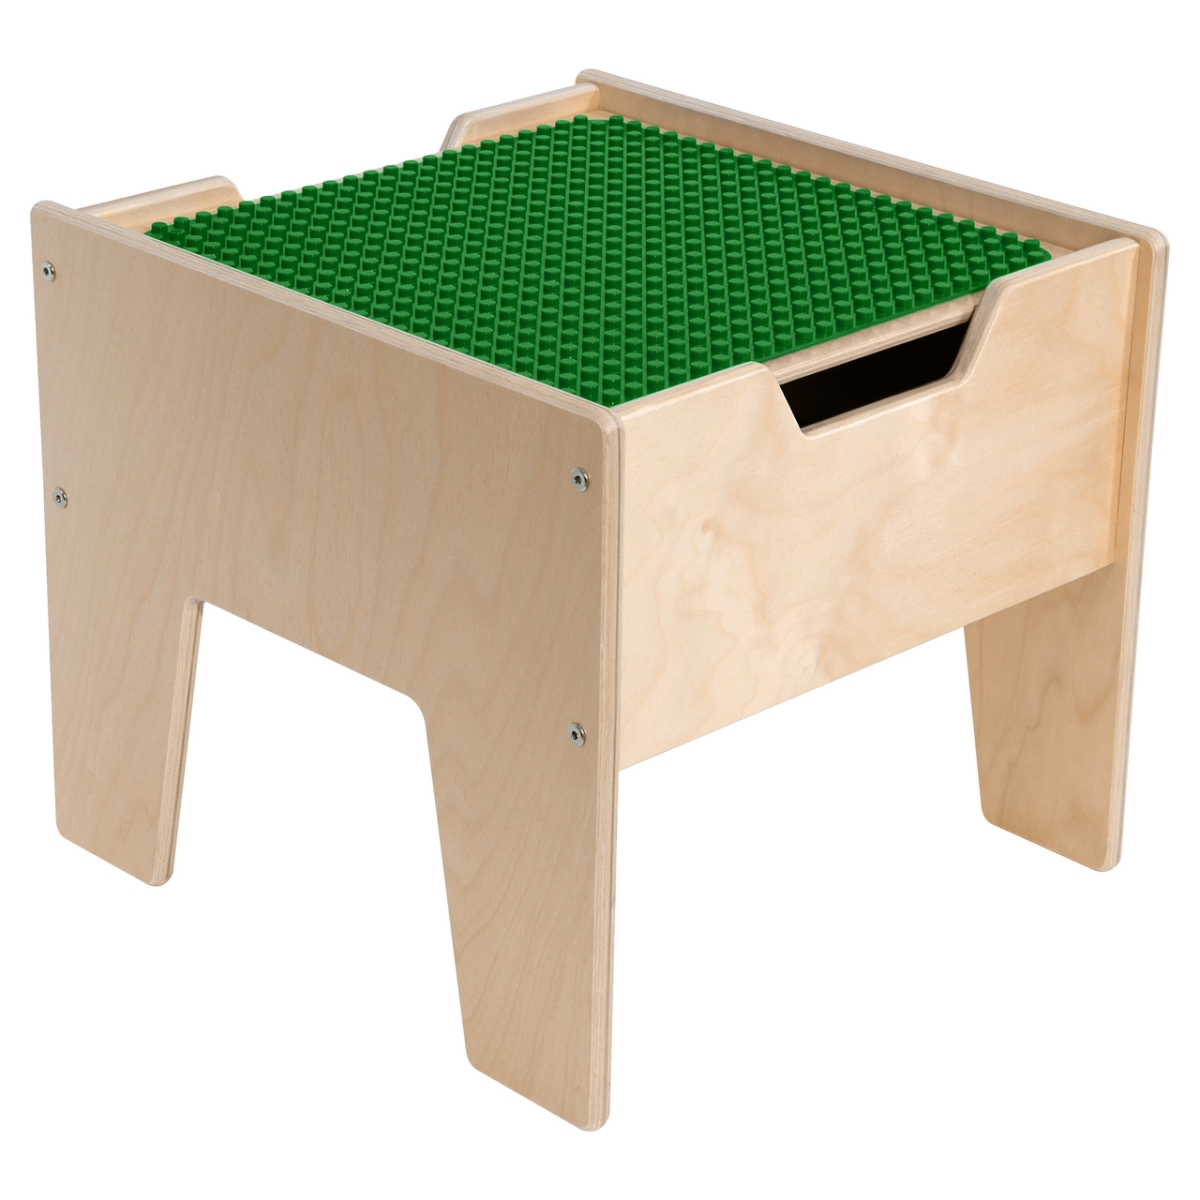 Picture of Contender C991300-PG 2-N-1 Activity Table with Green DUPLO Compatible Top - RTA